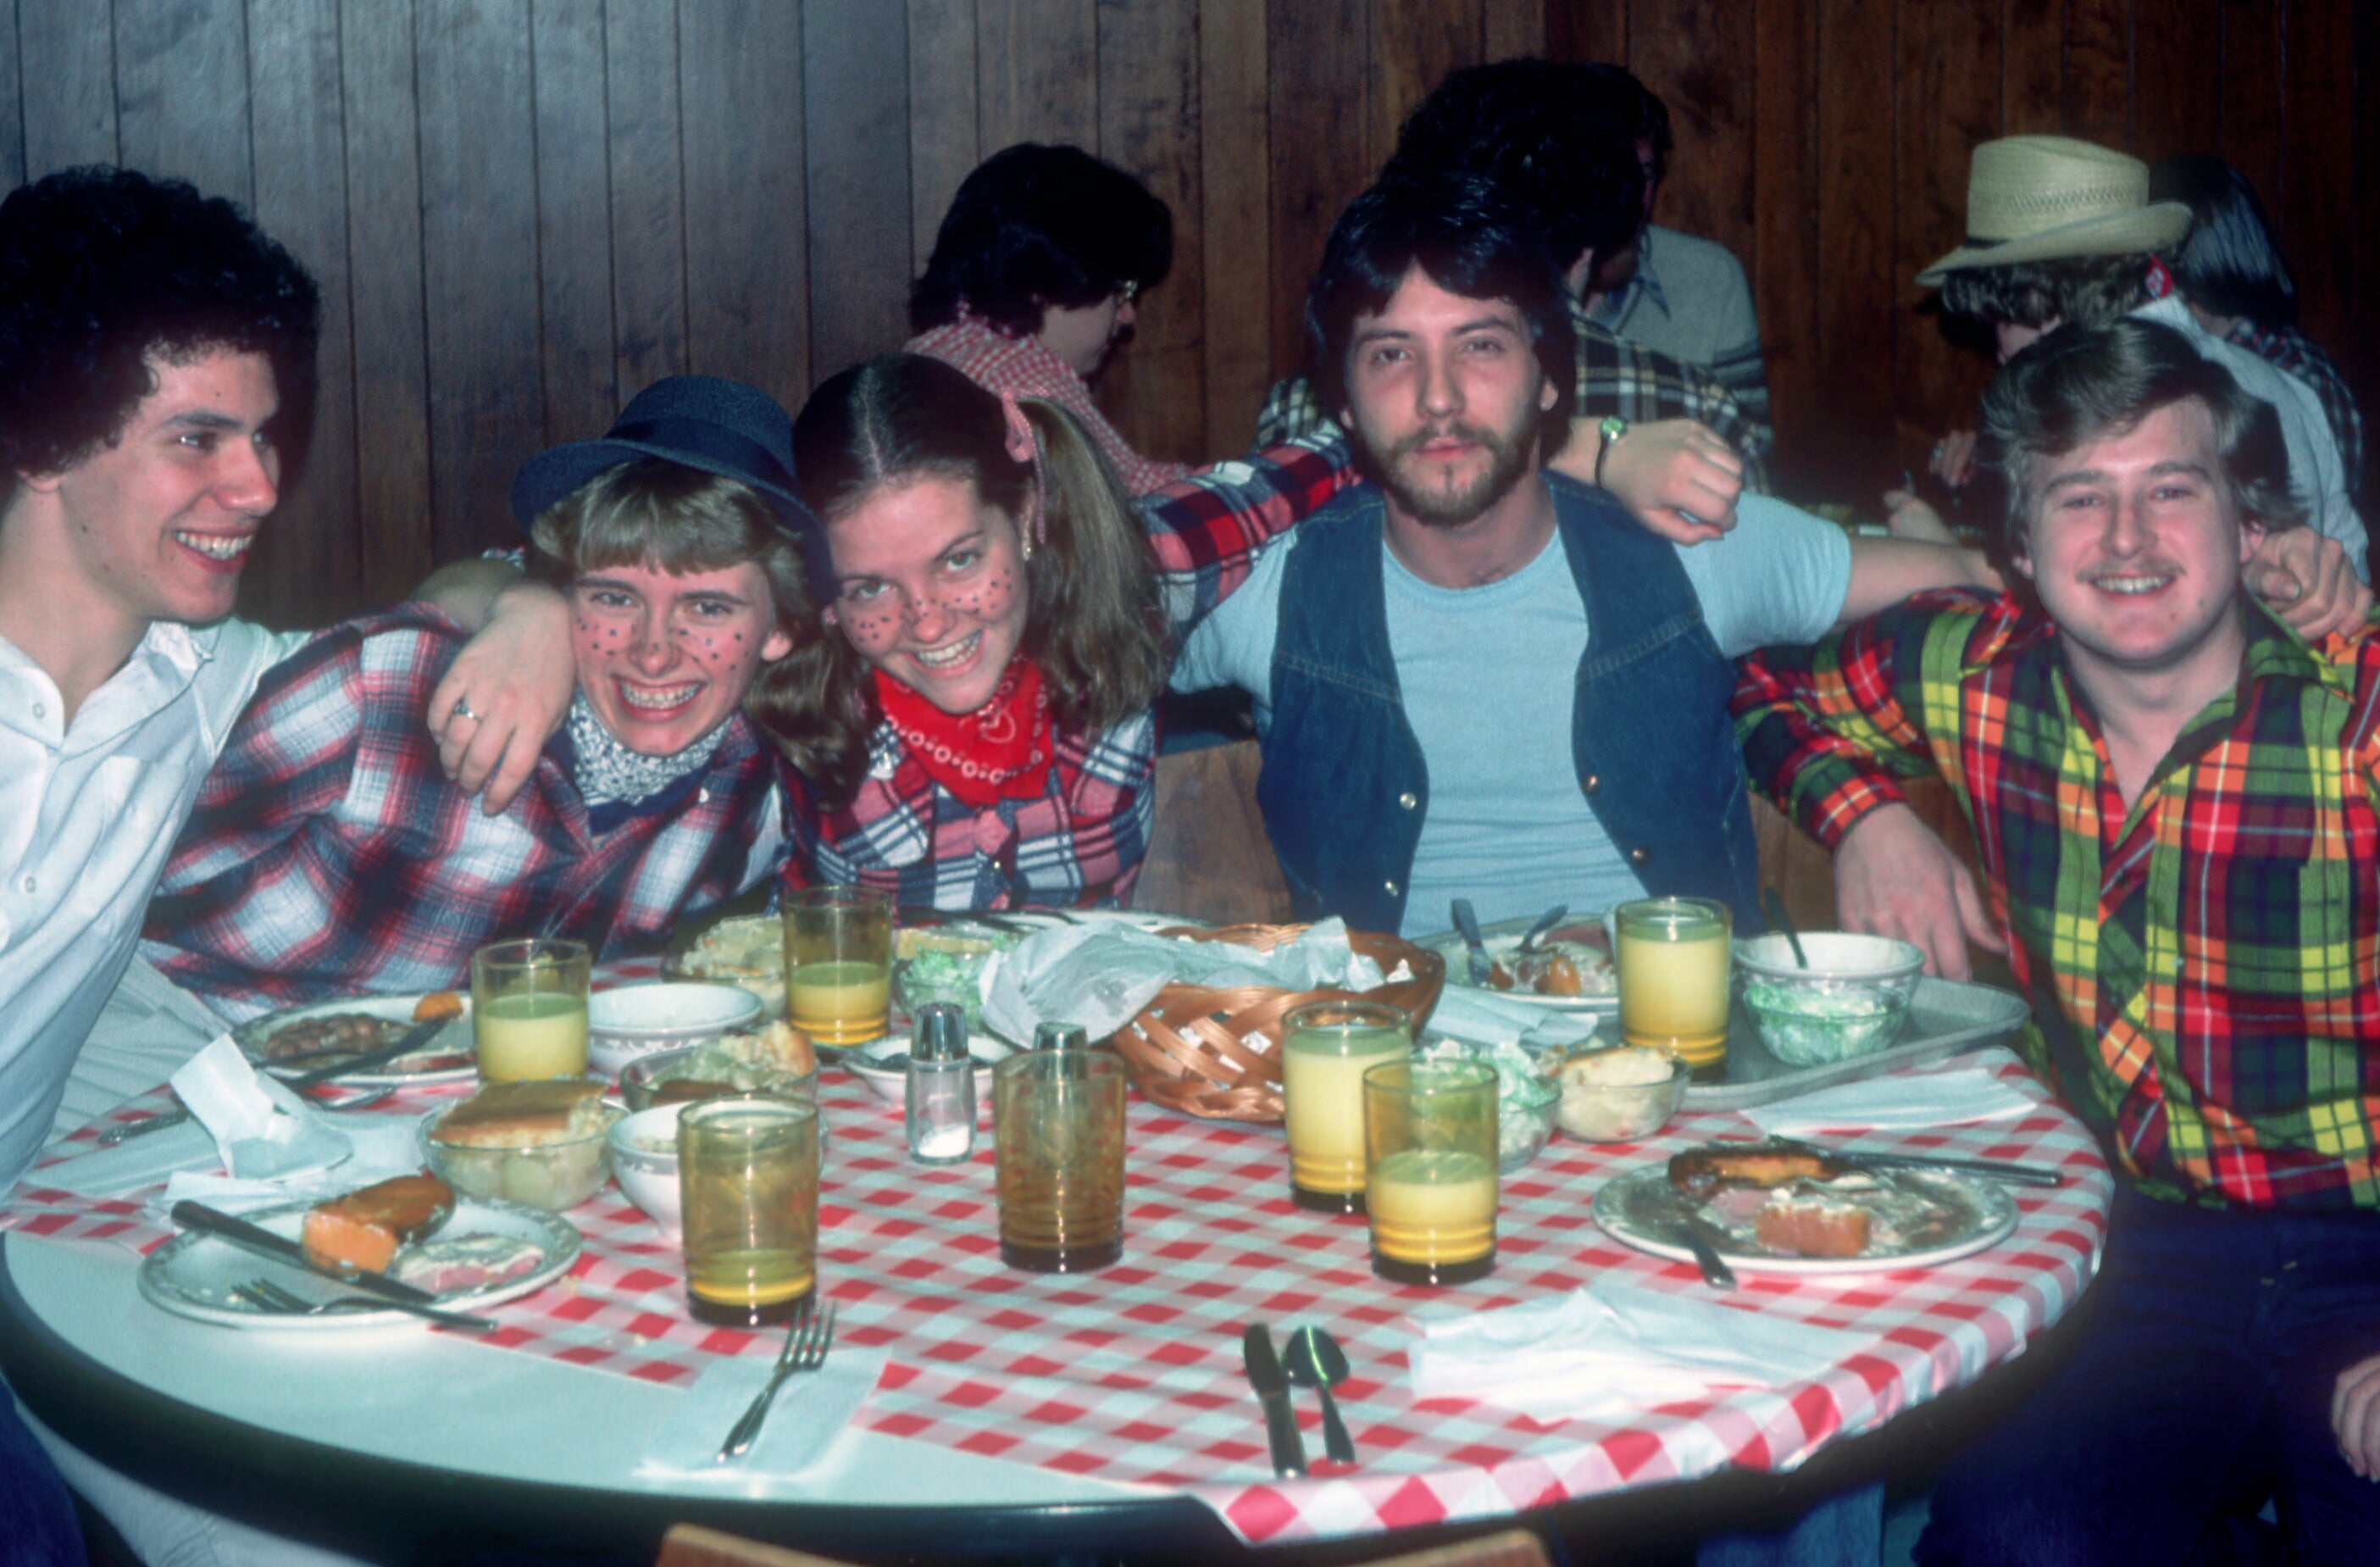 Student banquet at Grebel in the early '80s